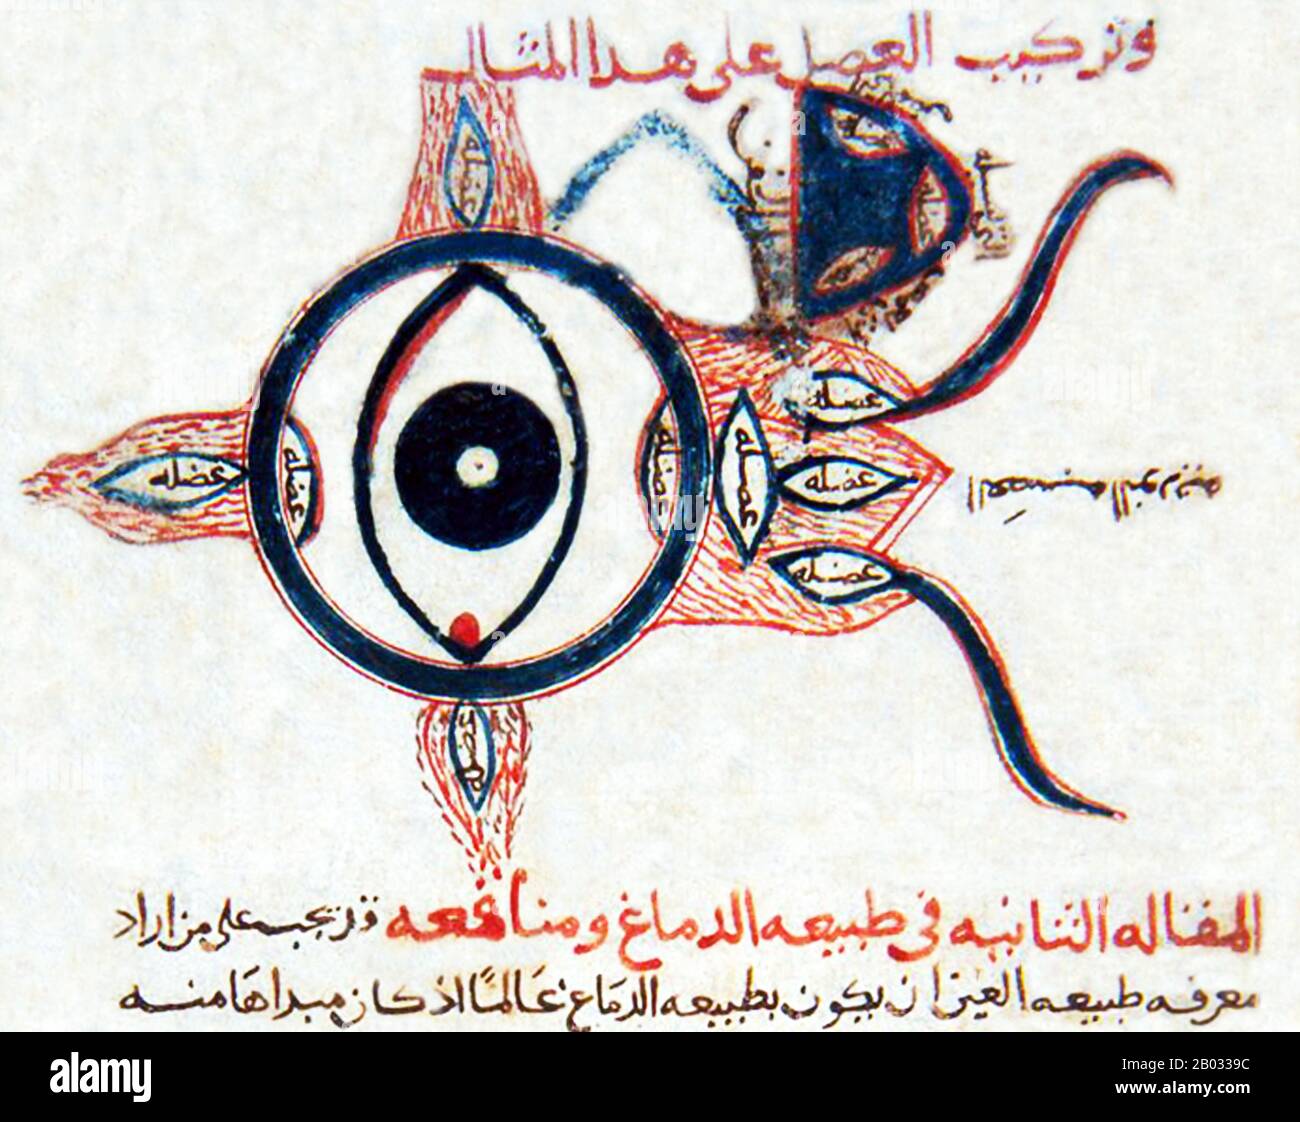 Hunayn ibn Ishaq ( Latin: Iohannitius) (809 – 873) was a famous and influential scholar, physician, and scientist of Nestorian Arab Christian descent. He and his students transmitted their Syriac and Arabic translations of many classical Greek texts throughout the Islamic world, during the apex of the Islamic Abbasid Caliphate.  Hunayn ibn Ishaq was the most productive translator of Greek medical and scientific treatises in his day. He studied Greek and became known among the Arabs as the 'Sheikh of the translators'. He mastered four languages: Arabic, Syriac, Greek and Persian. Stock Photo